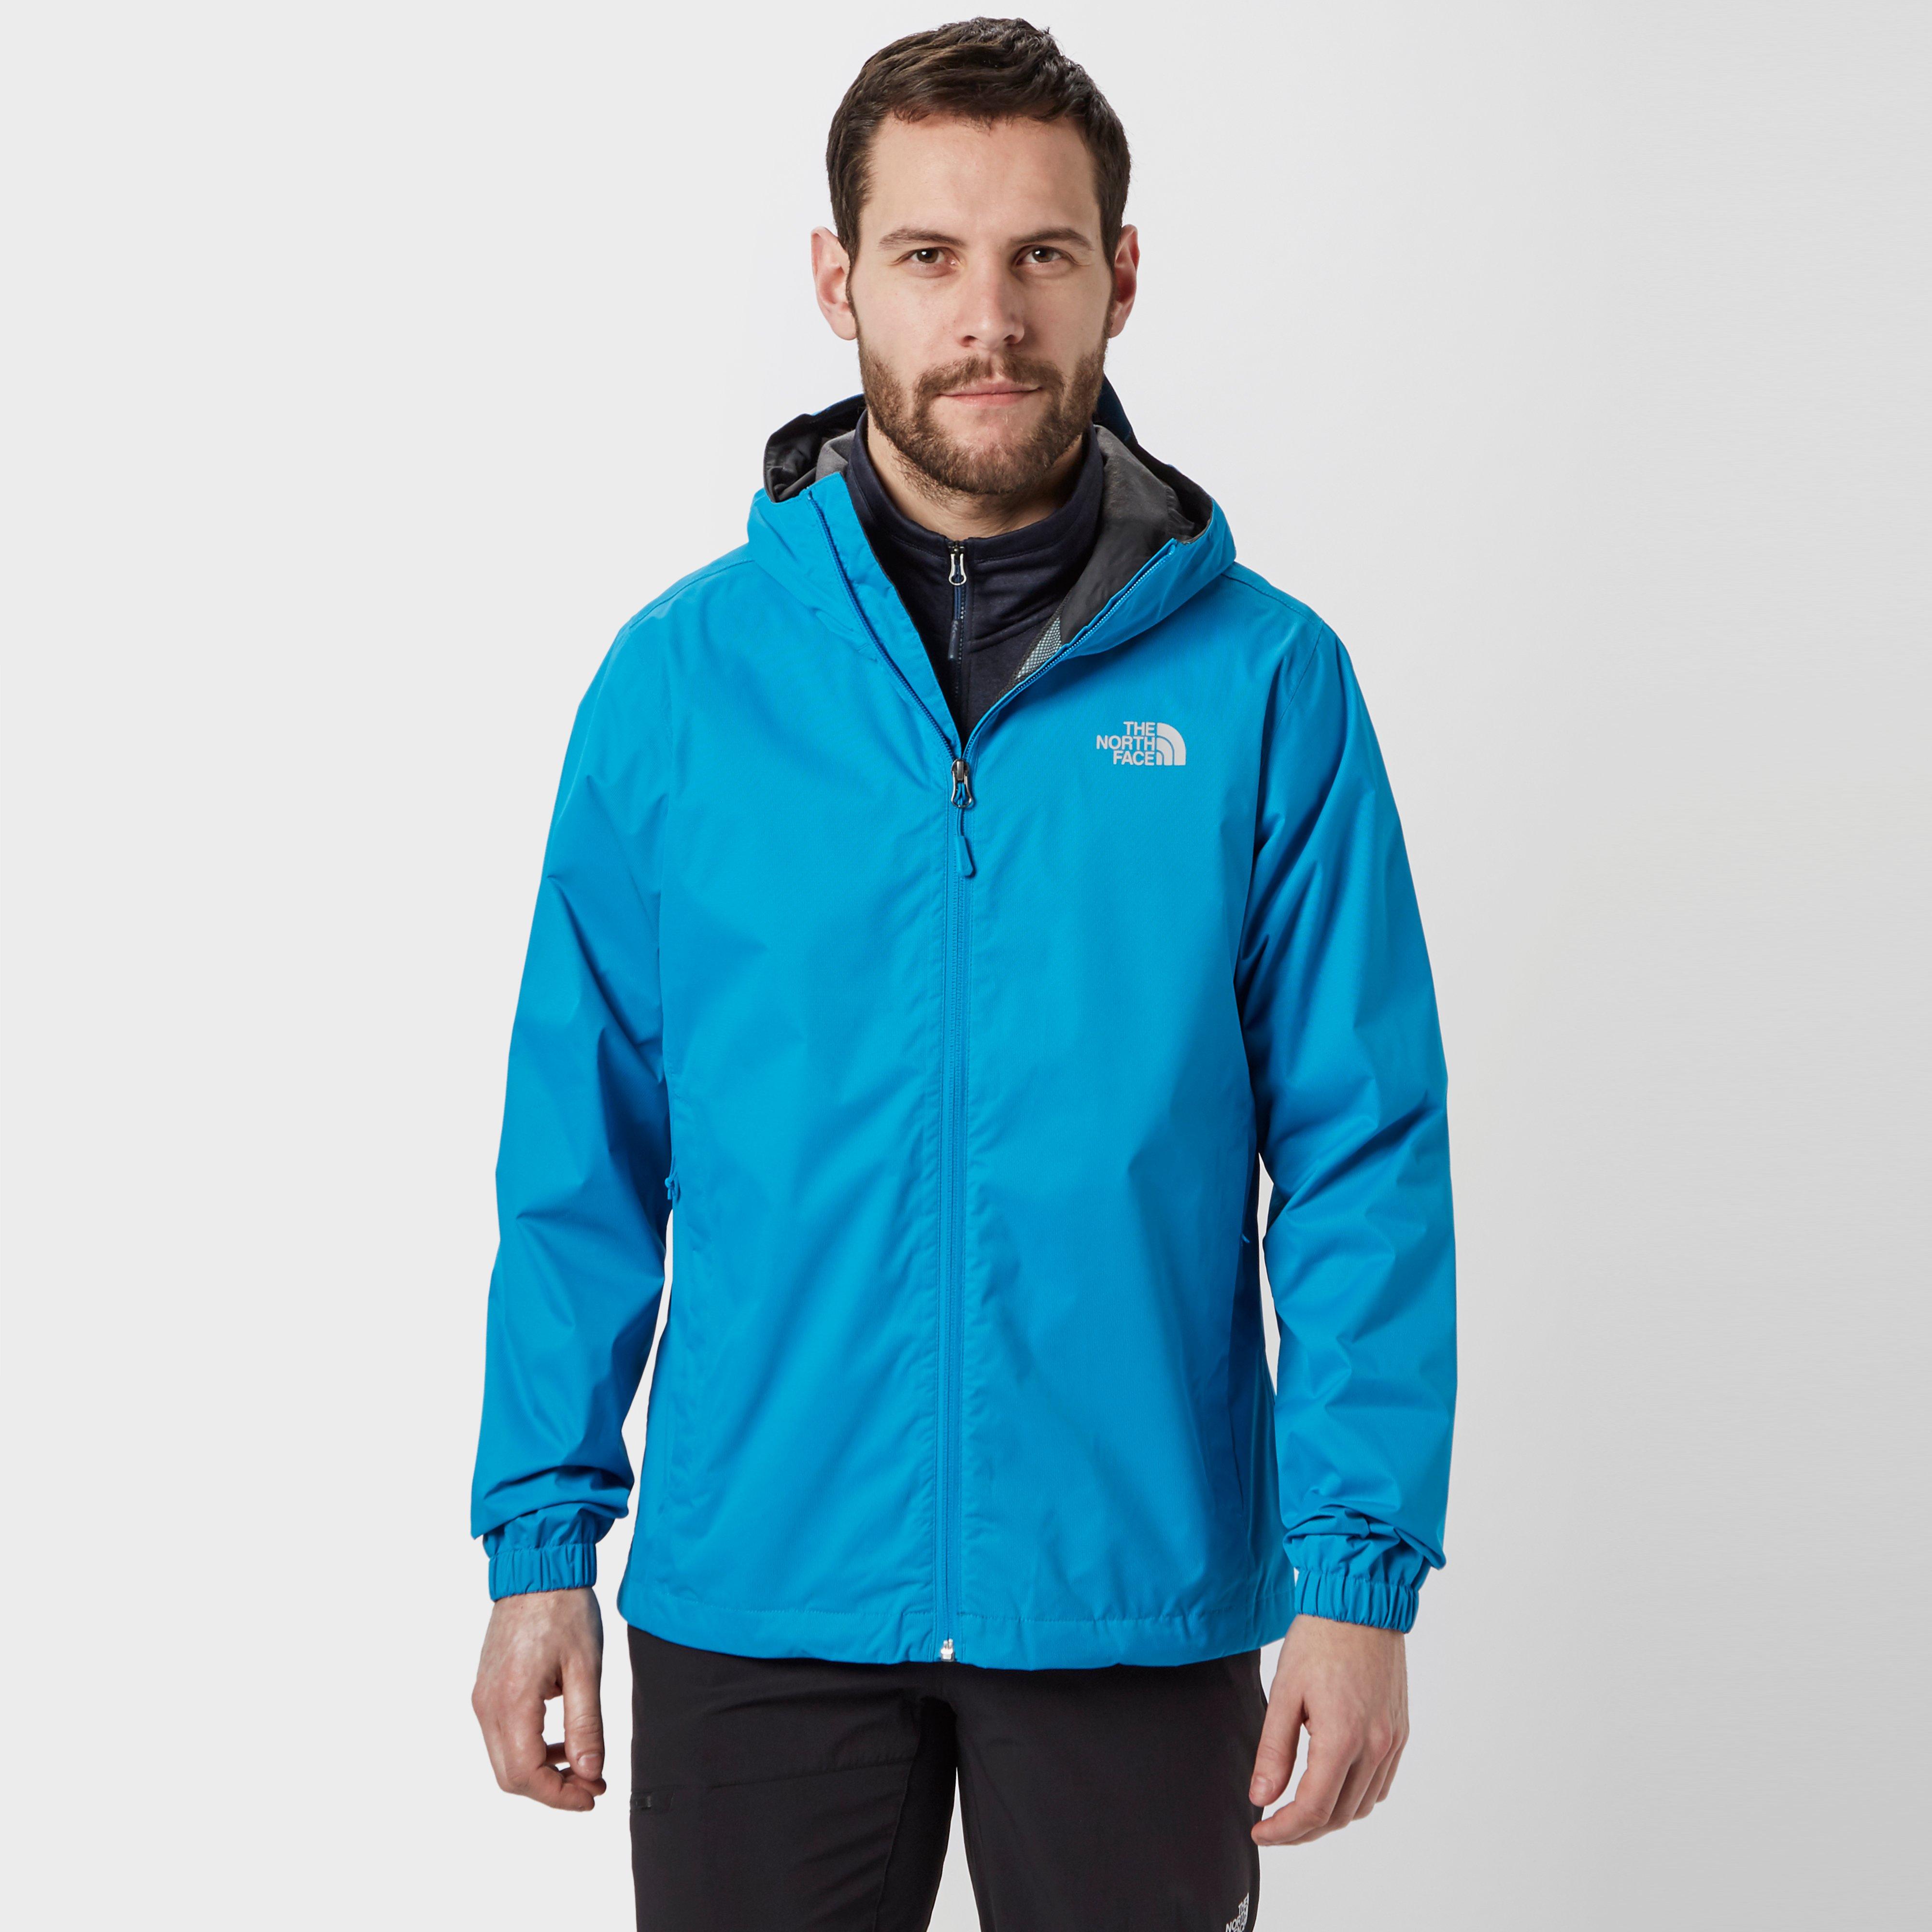 north face blue winter jacket